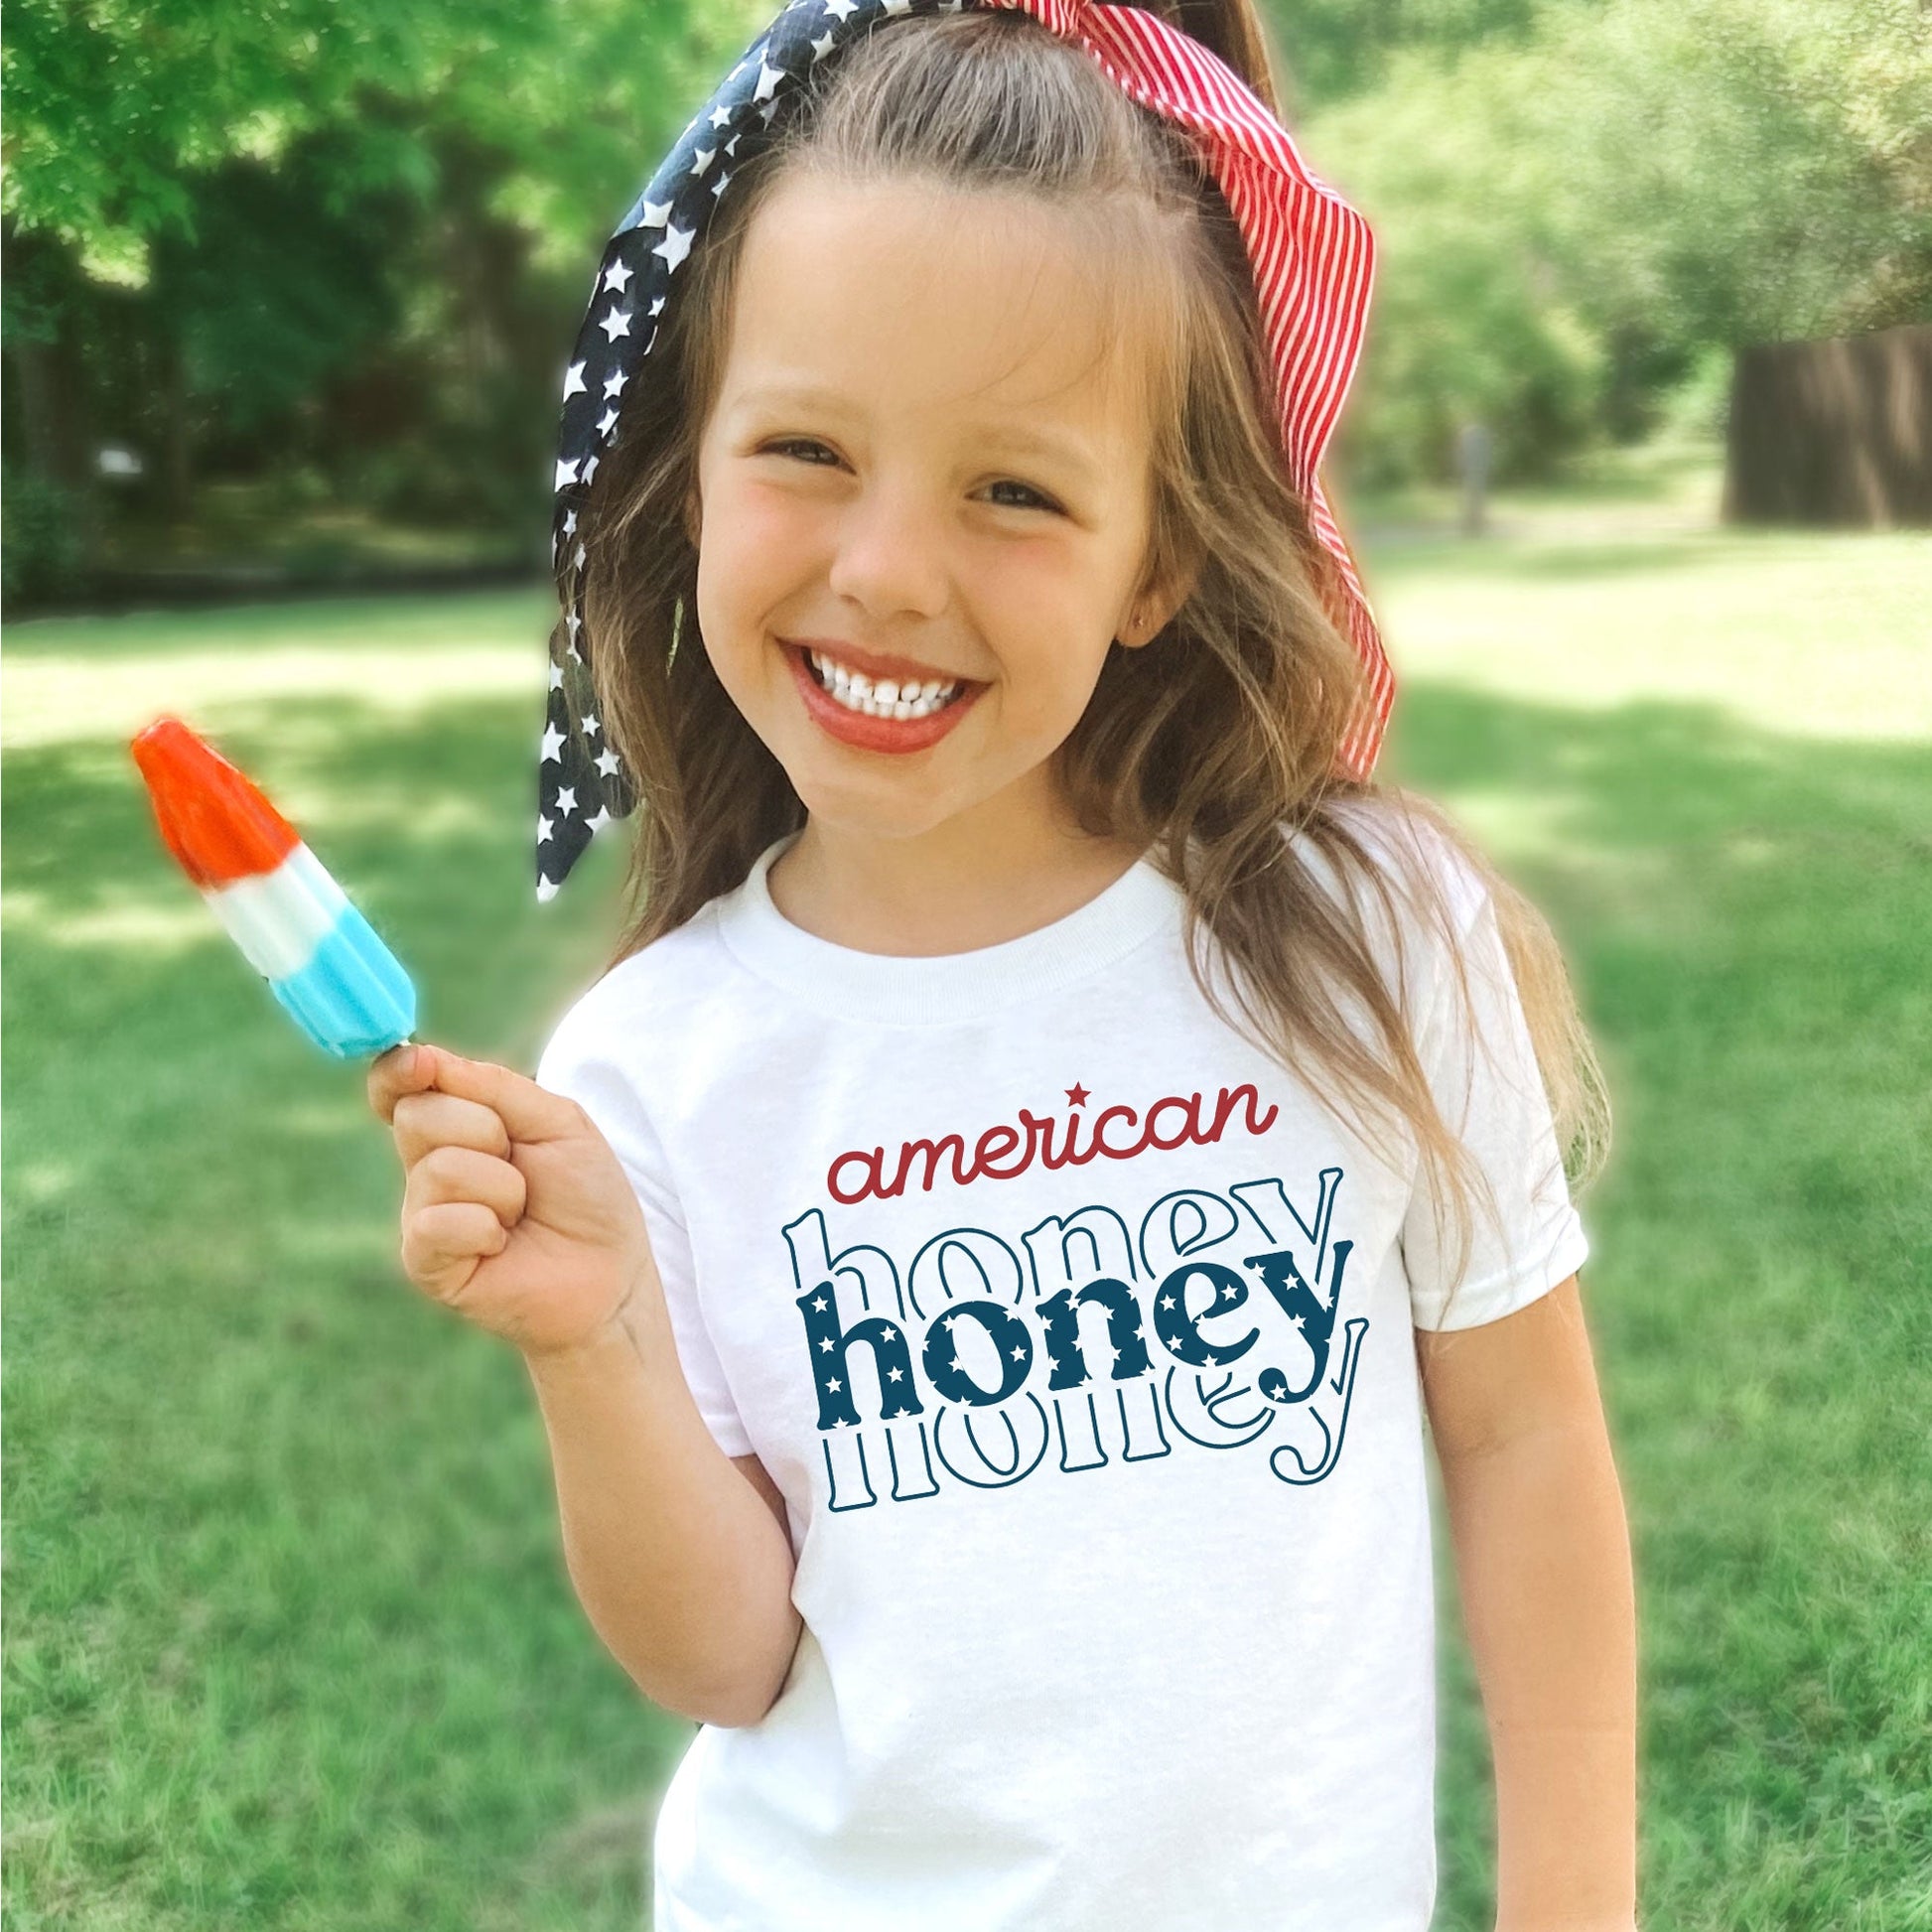 little girl wearing a white t-shirt with a red white and blue printed design reading 'american honey' across the chest